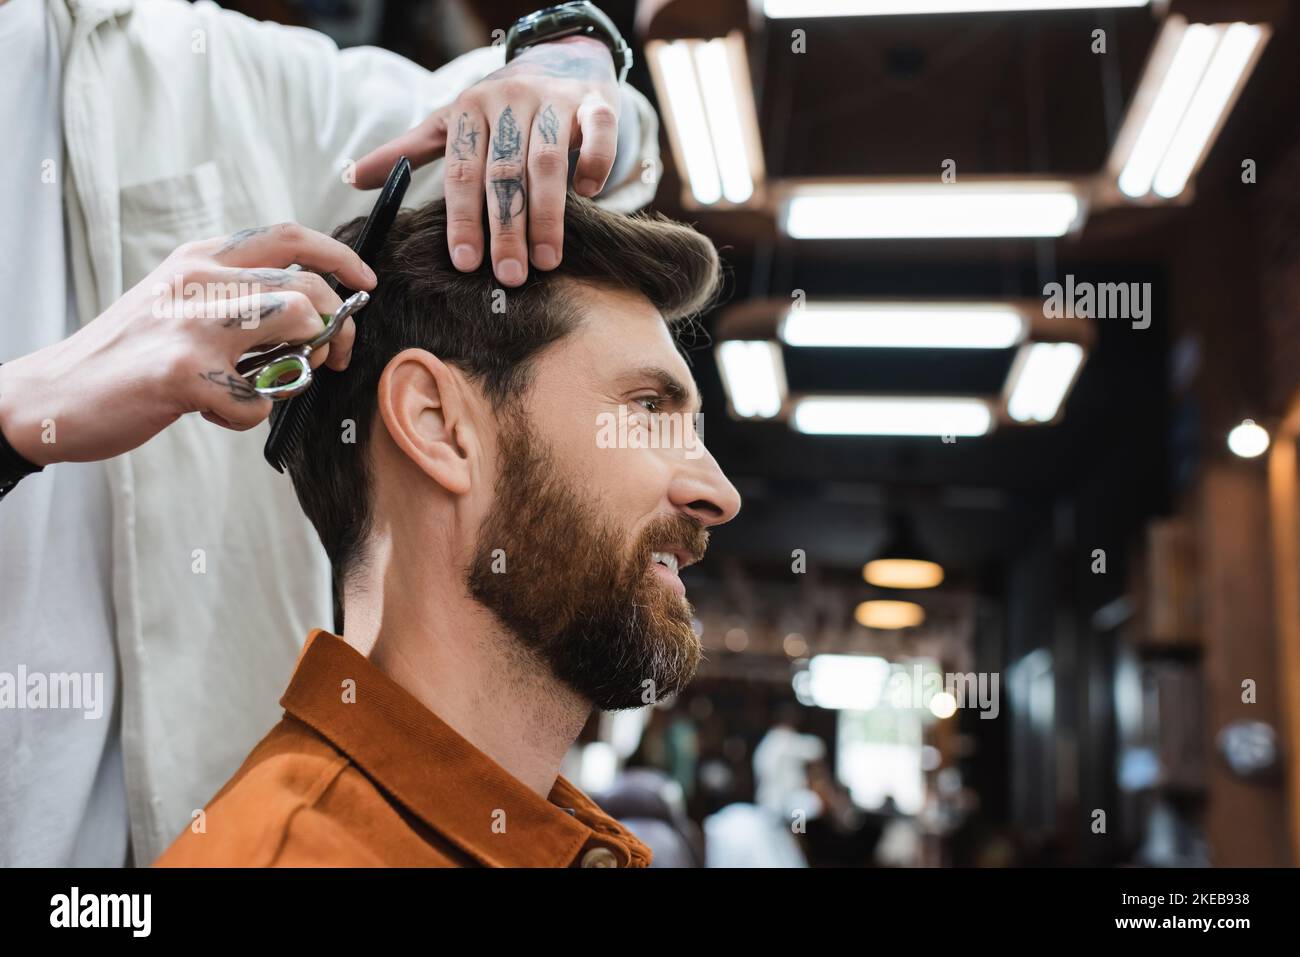 hairdresser cutting hair of brunette bearded man smiling in barbershop,stock image Stock Photo